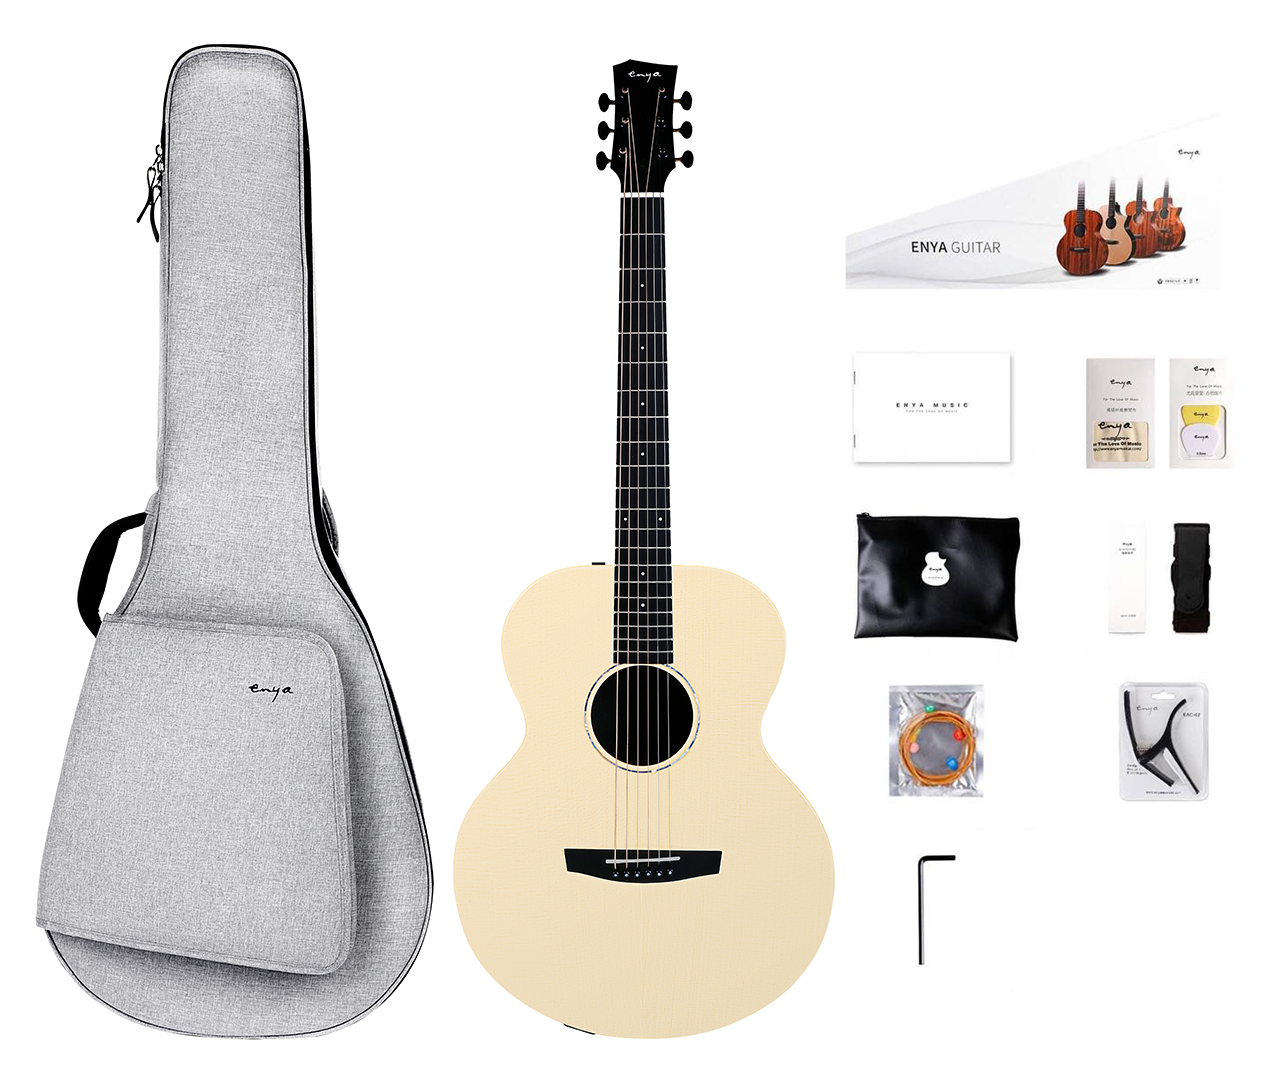 Enya EM-X2e 36" Solid Top Acoustic Guitar EQ With Bag And Accessories | ENYA , Zoso Music